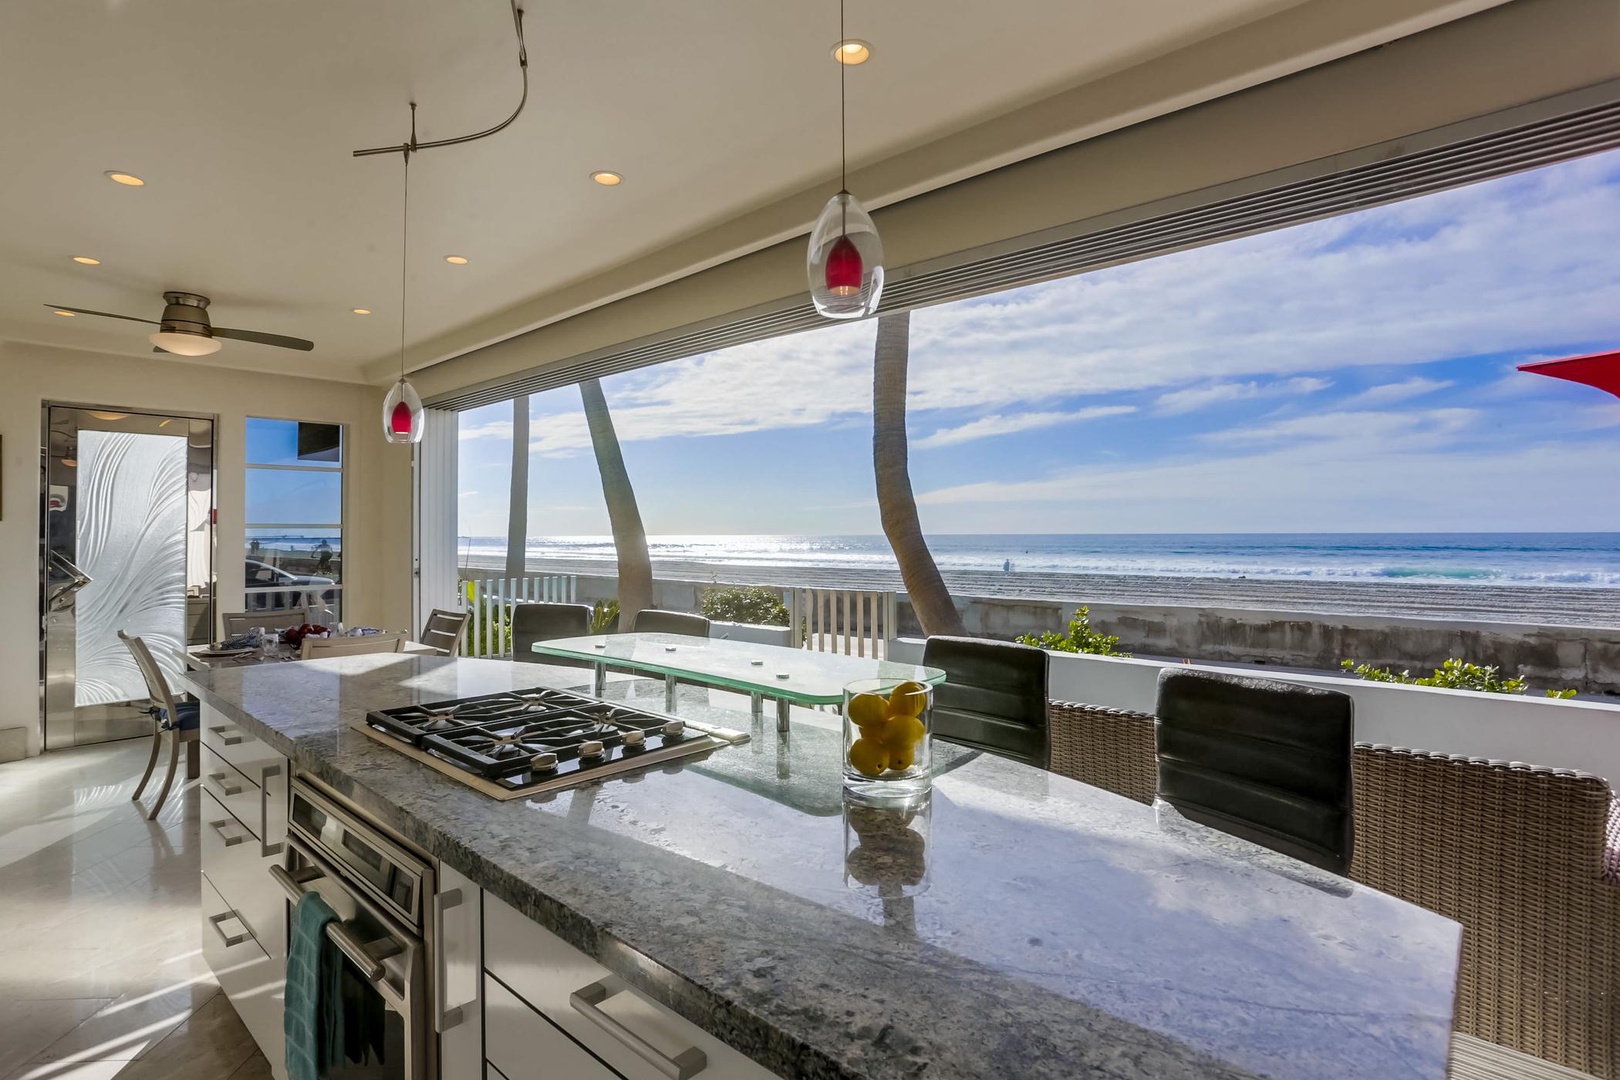 Cooking with an ocean view!